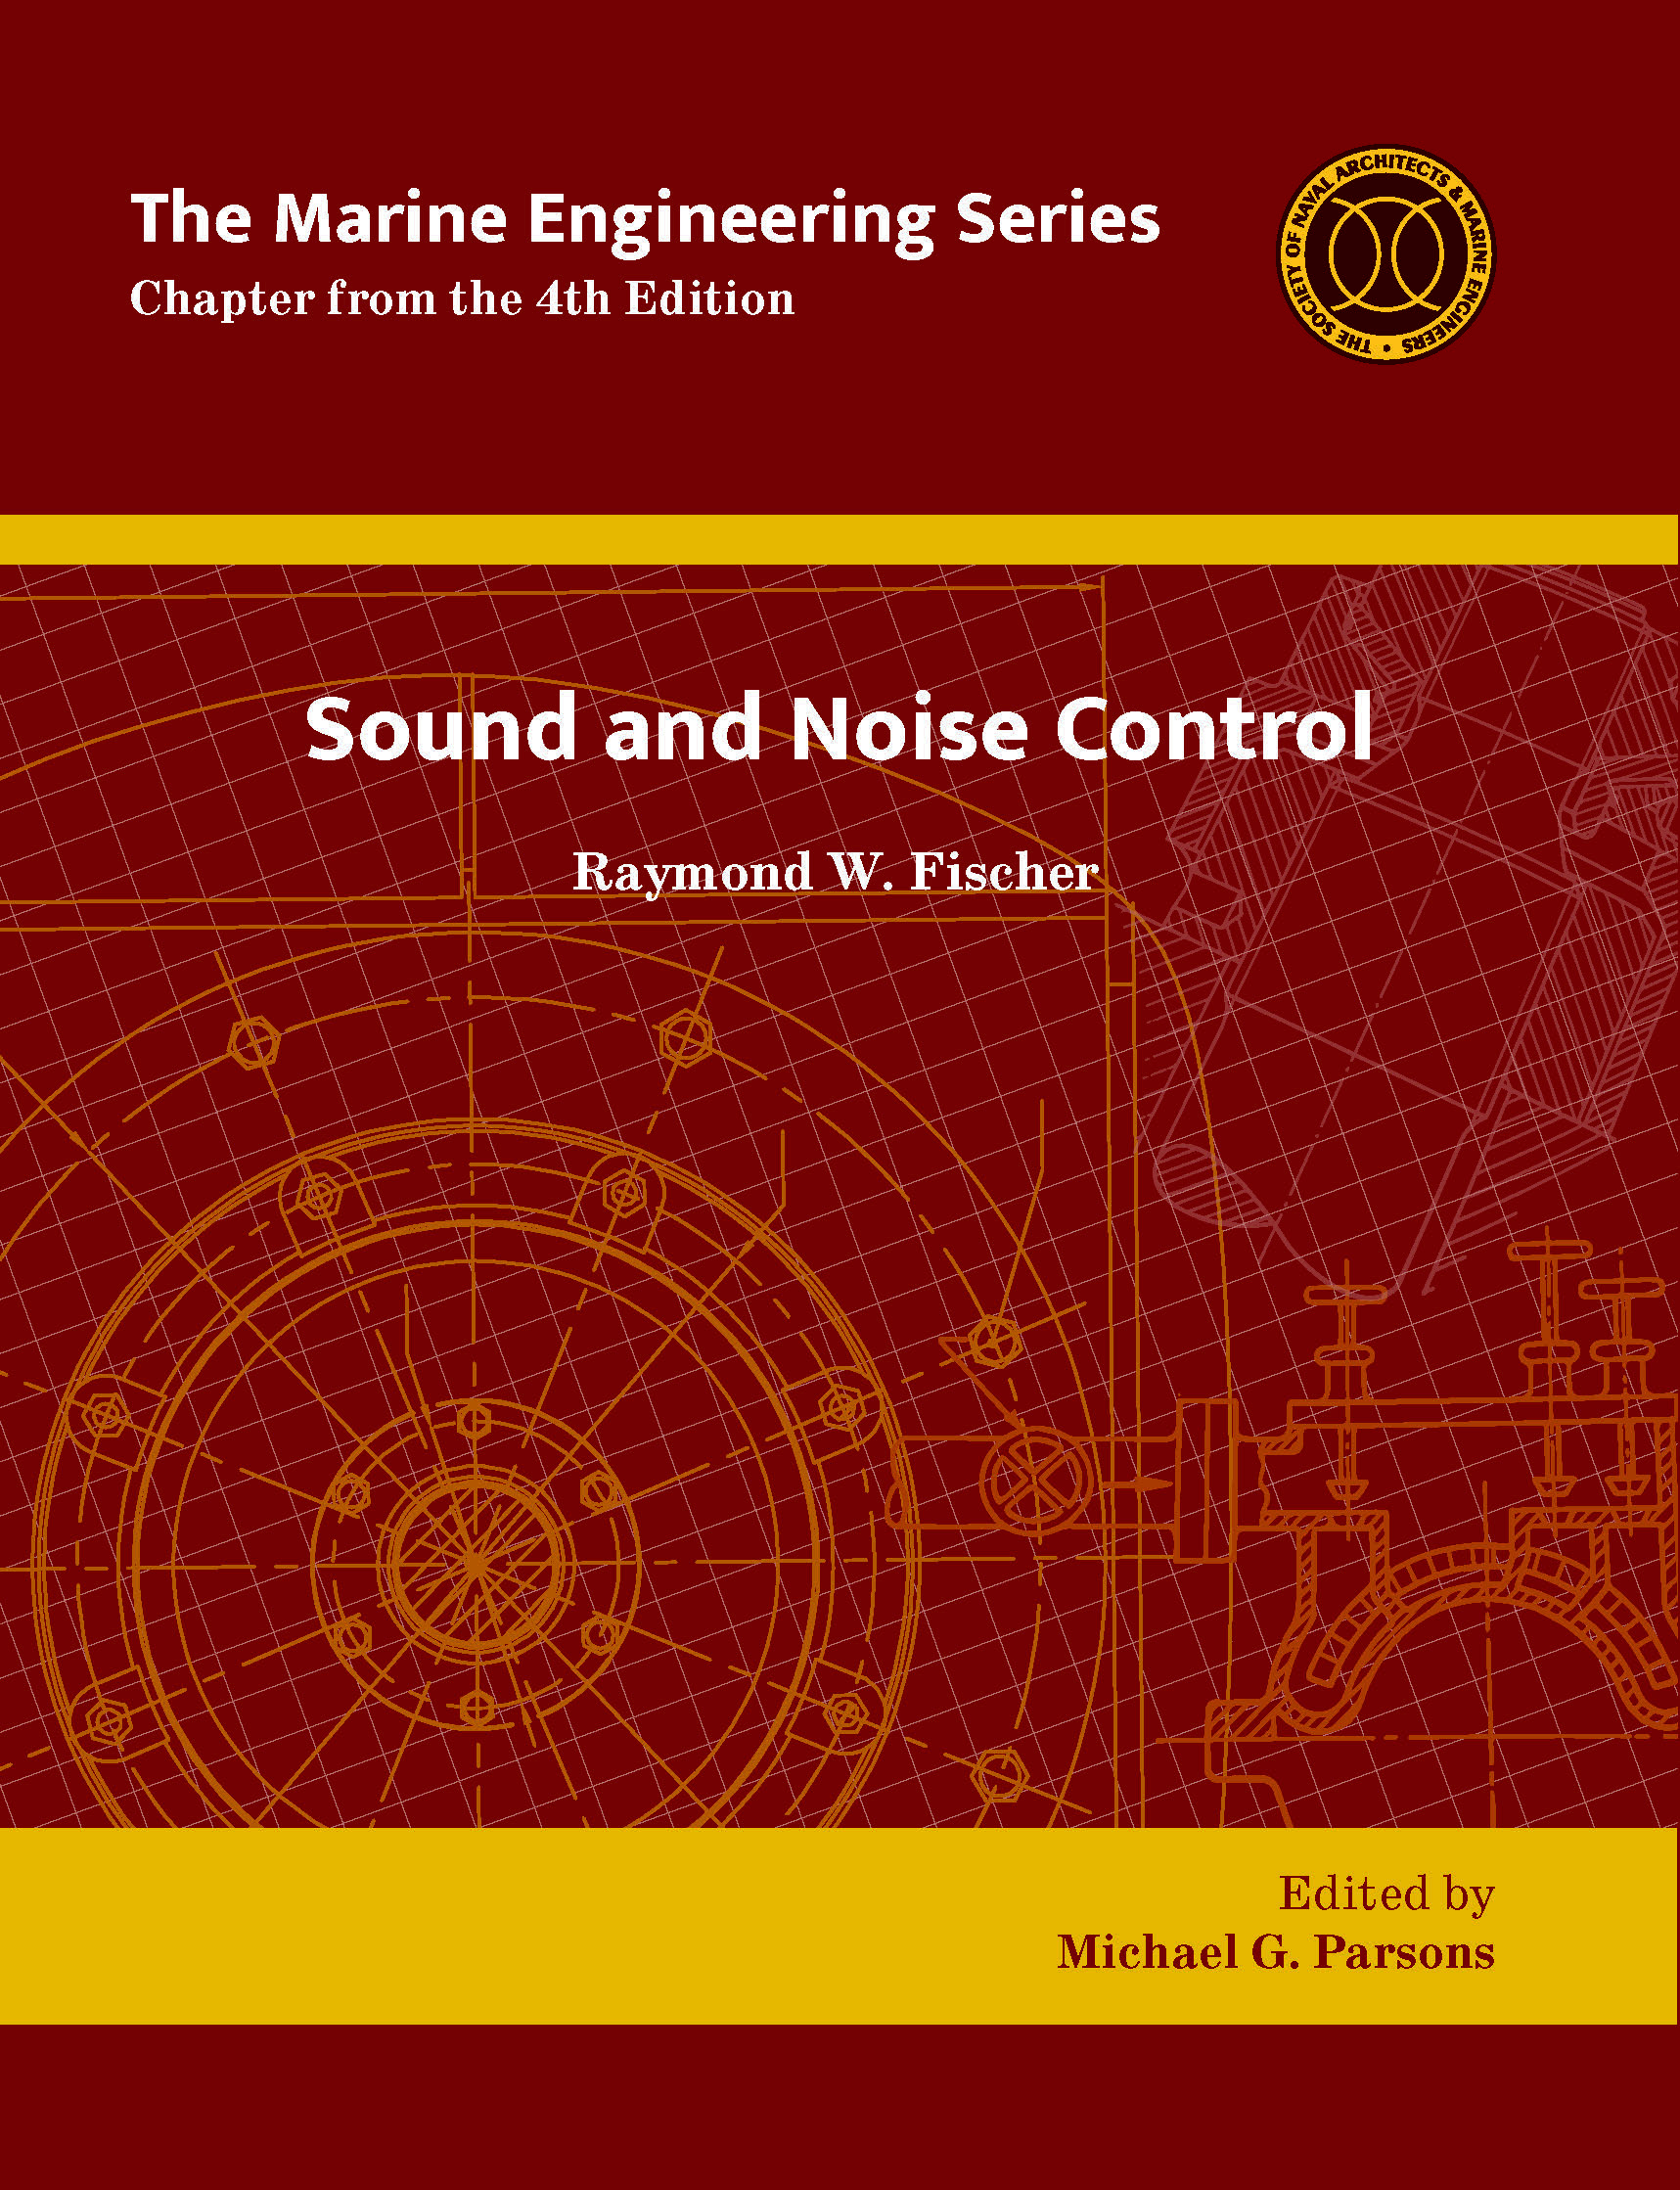 Marine Engineering Series: Sound and Noise Control